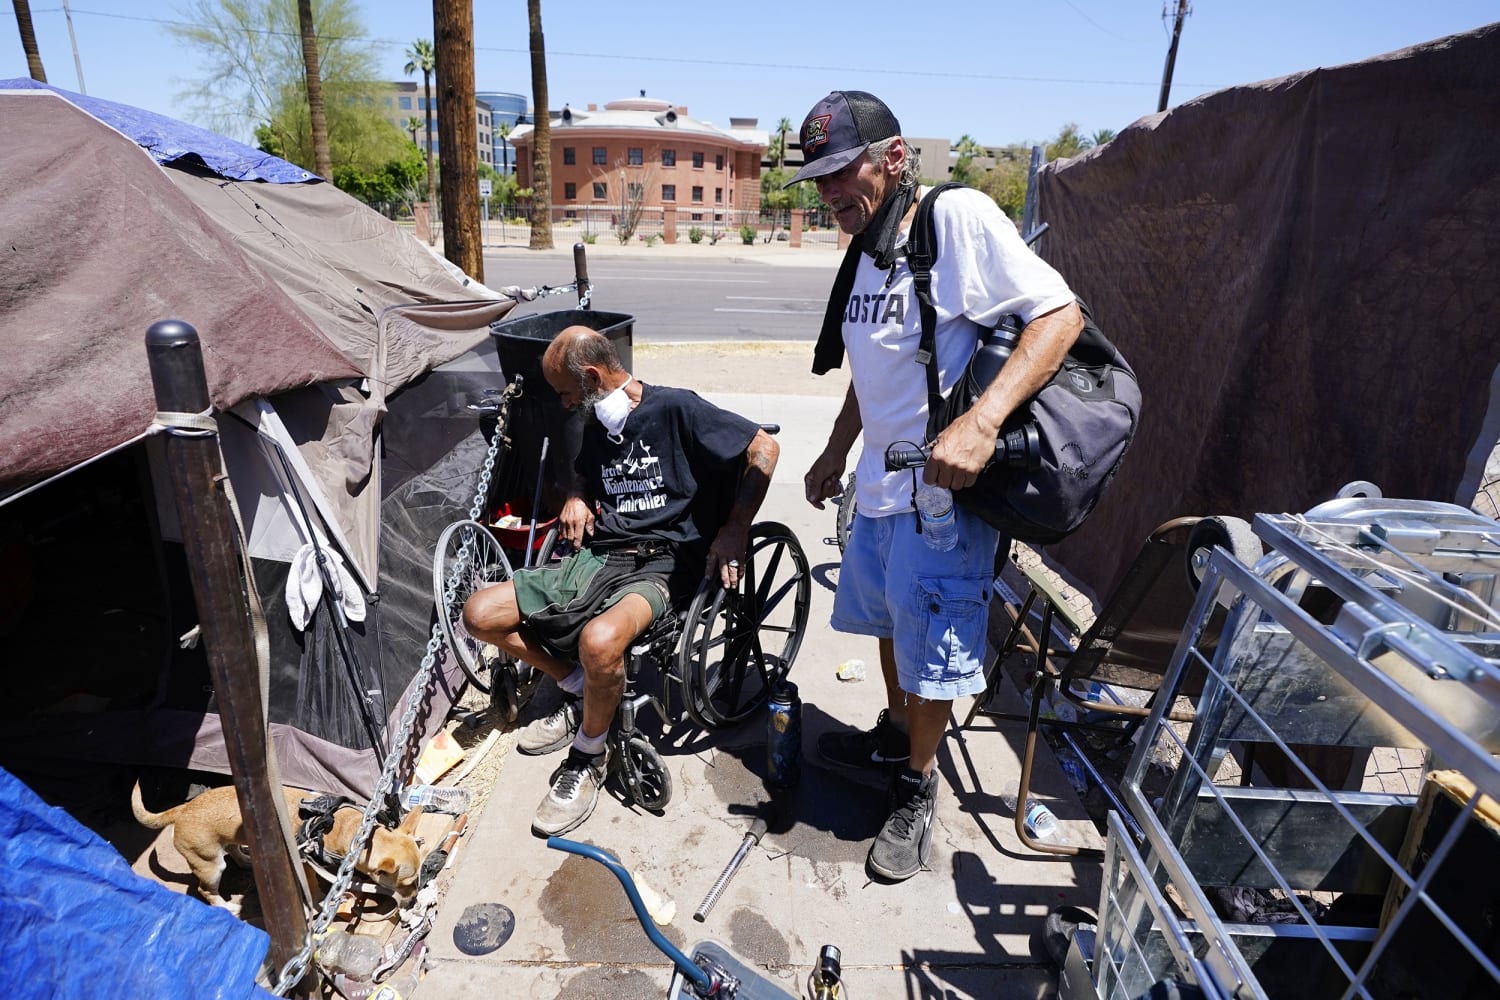 Hundreds of homeless die in extreme heat